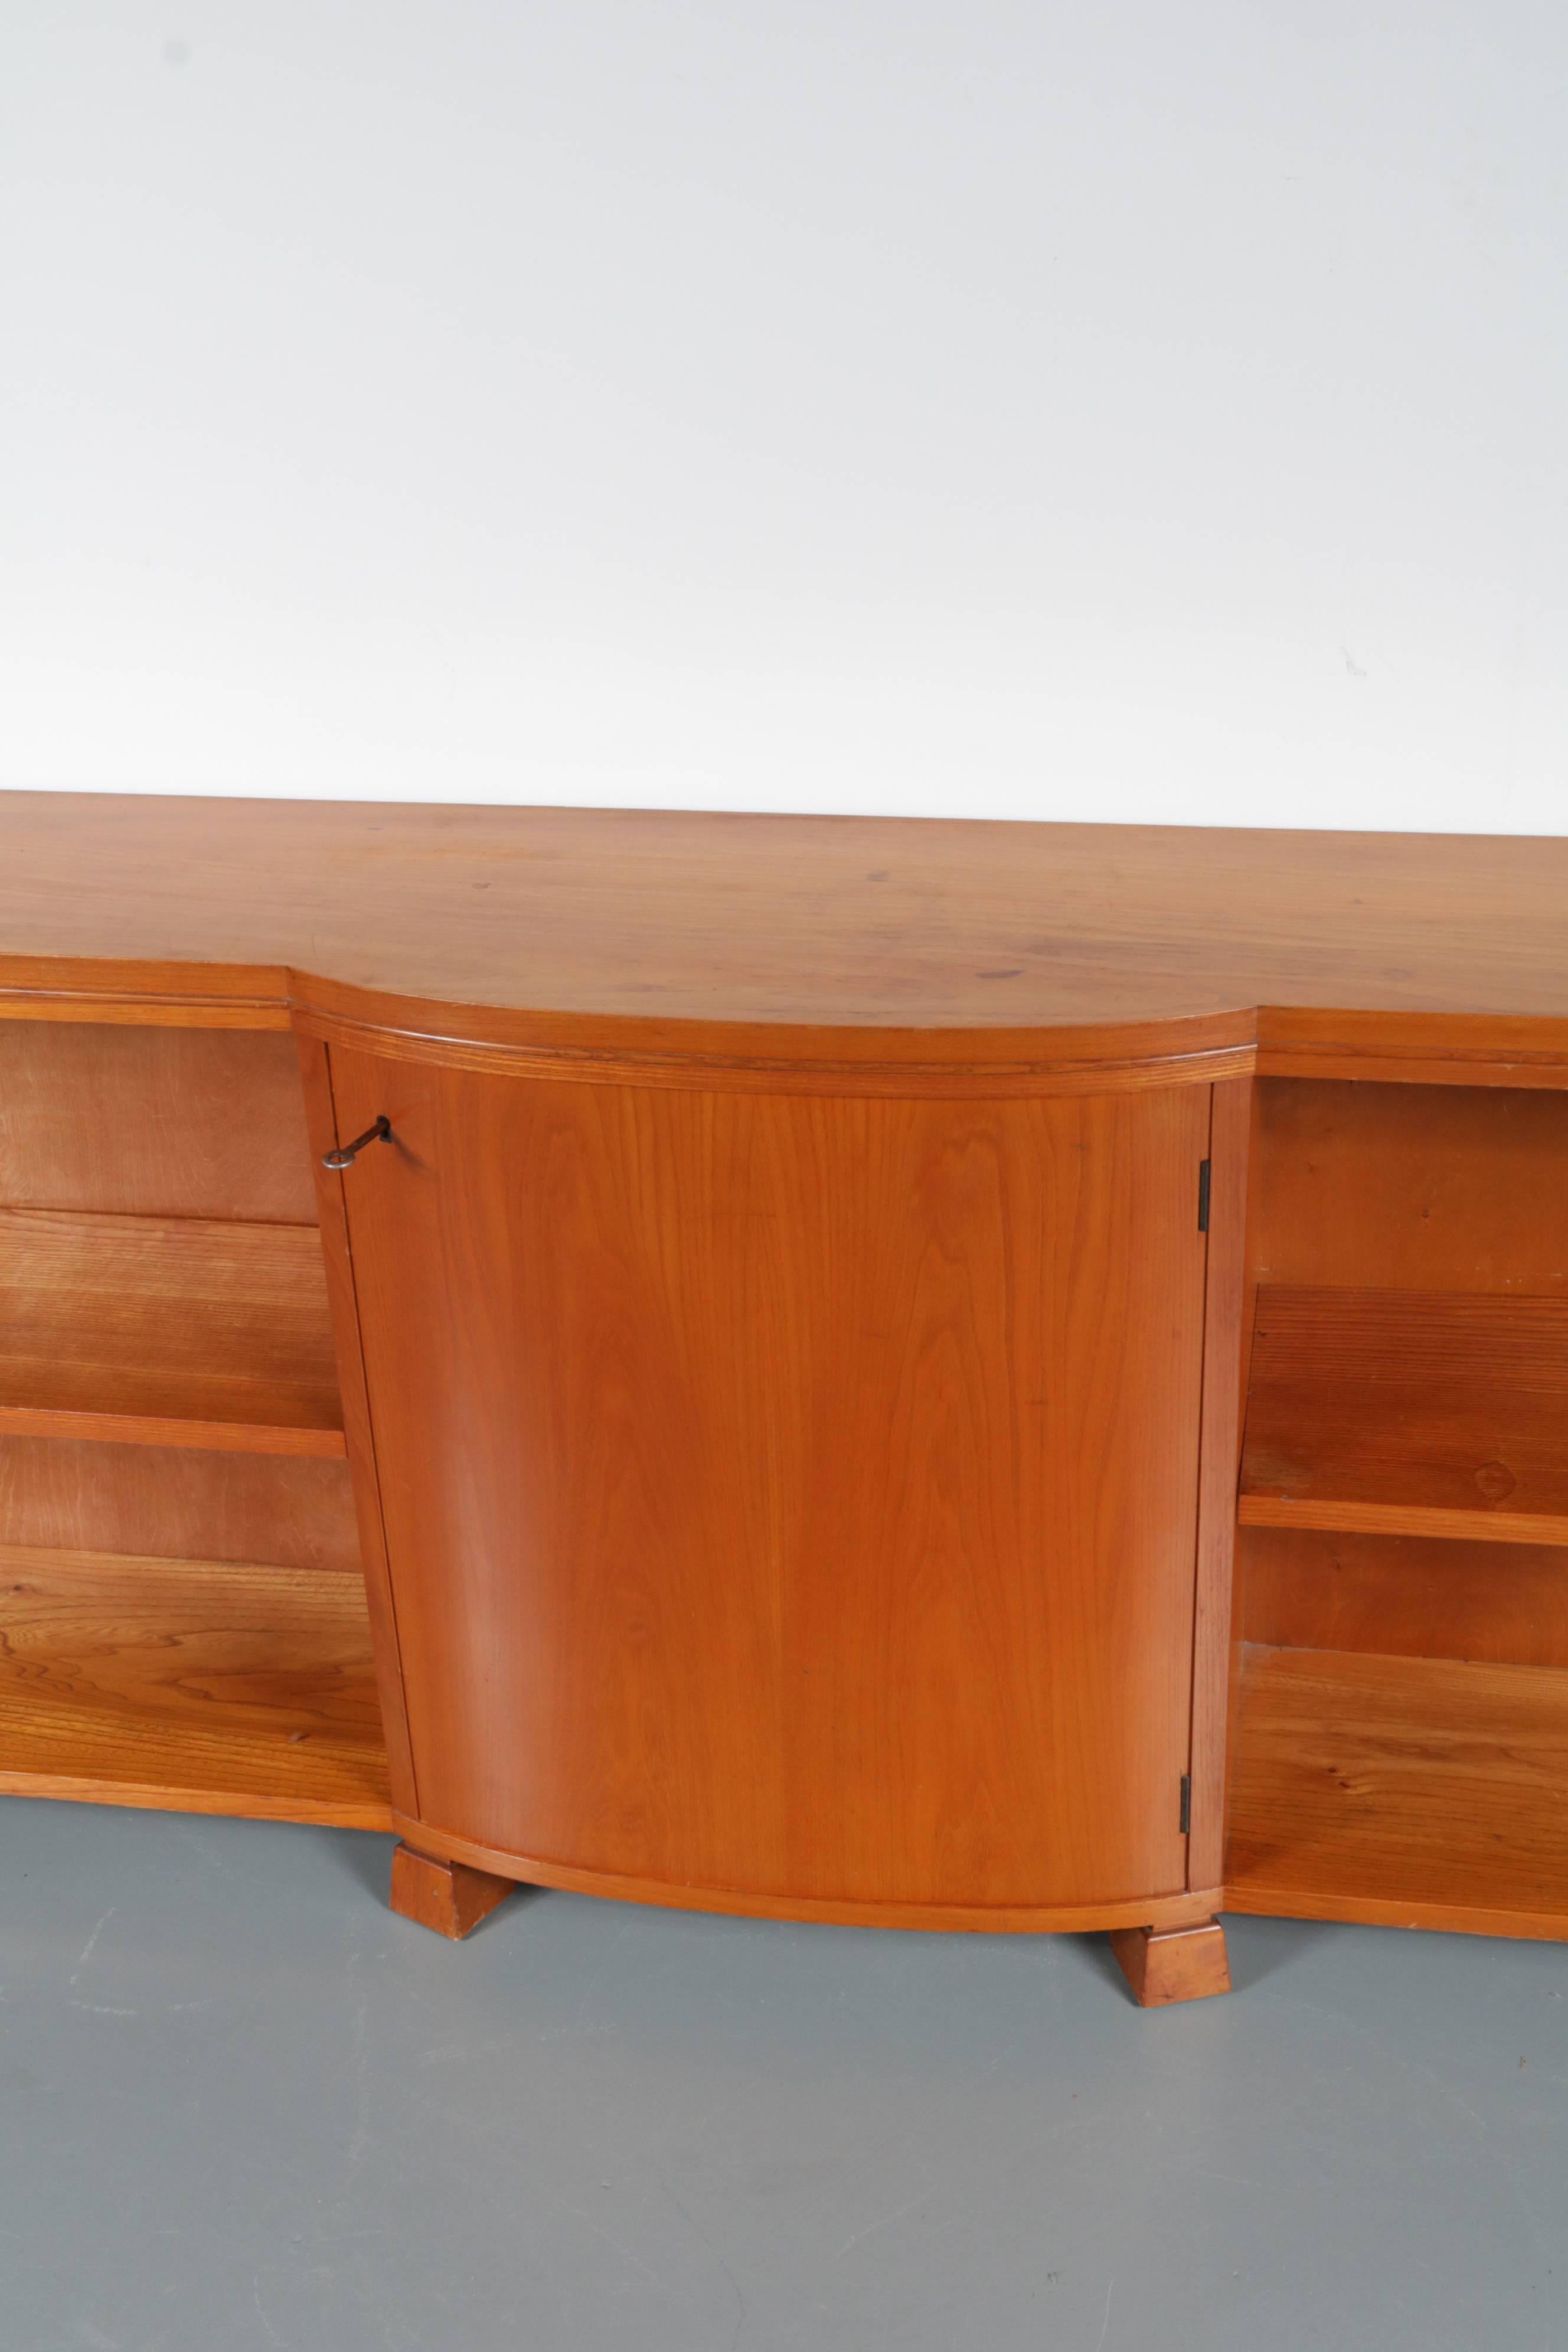 A beautiful sideboard designed by Ferdinand Lundquist, manufactured by A/B Ferd. Lundquist & Co in Göteborg, Sweden, circa 1940.

This wonderful piece of Scandinavian design is made of high quality teak wood in a nice warm brown colour. The